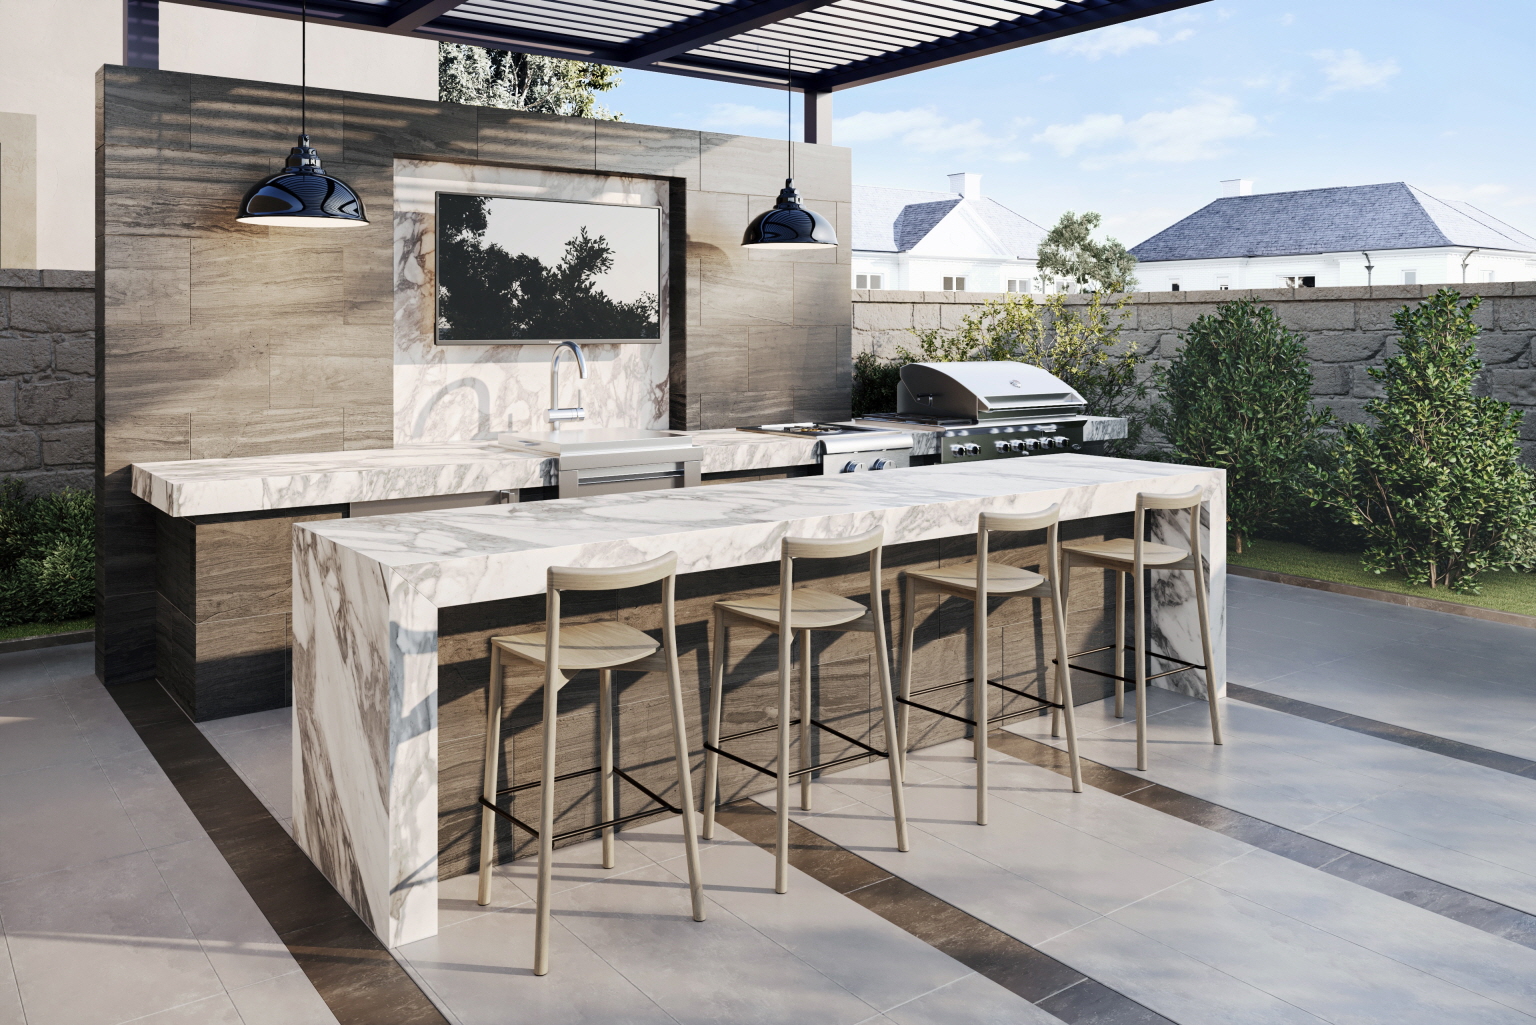 Start with LX Hausys to create the kitchen of your dreams